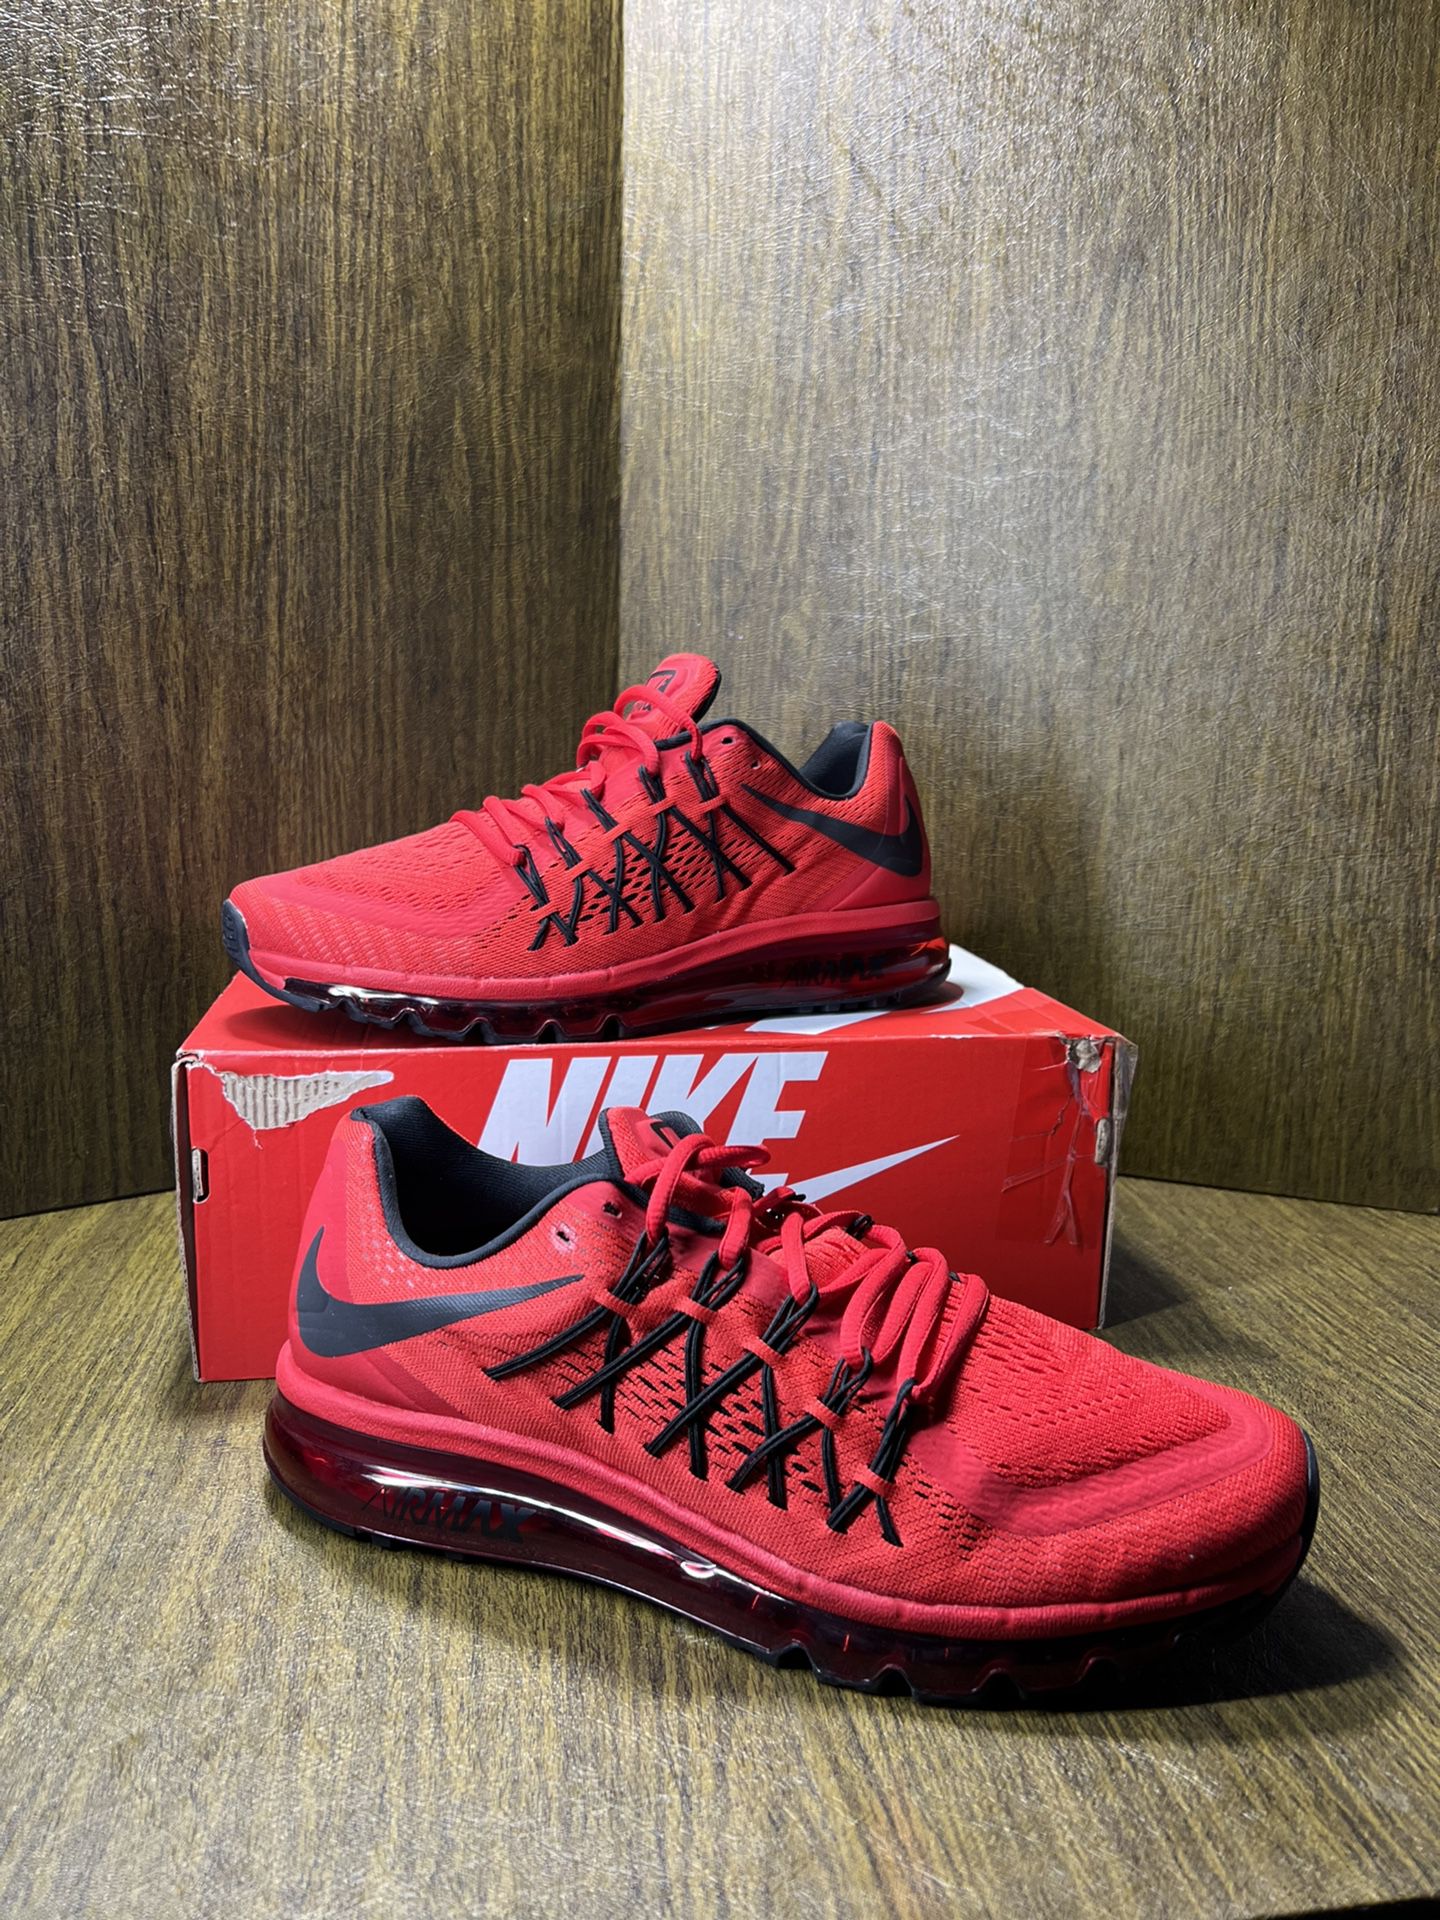 Prisionero de guerra vestido Vandalir NIKE / Air Max 2015 / BLOOD RED / Running shoes kicks / SIZE: Men's 12 / DS  Brand New w/ Box!! / Red & Black for Sale in Kent, WA - OfferUp